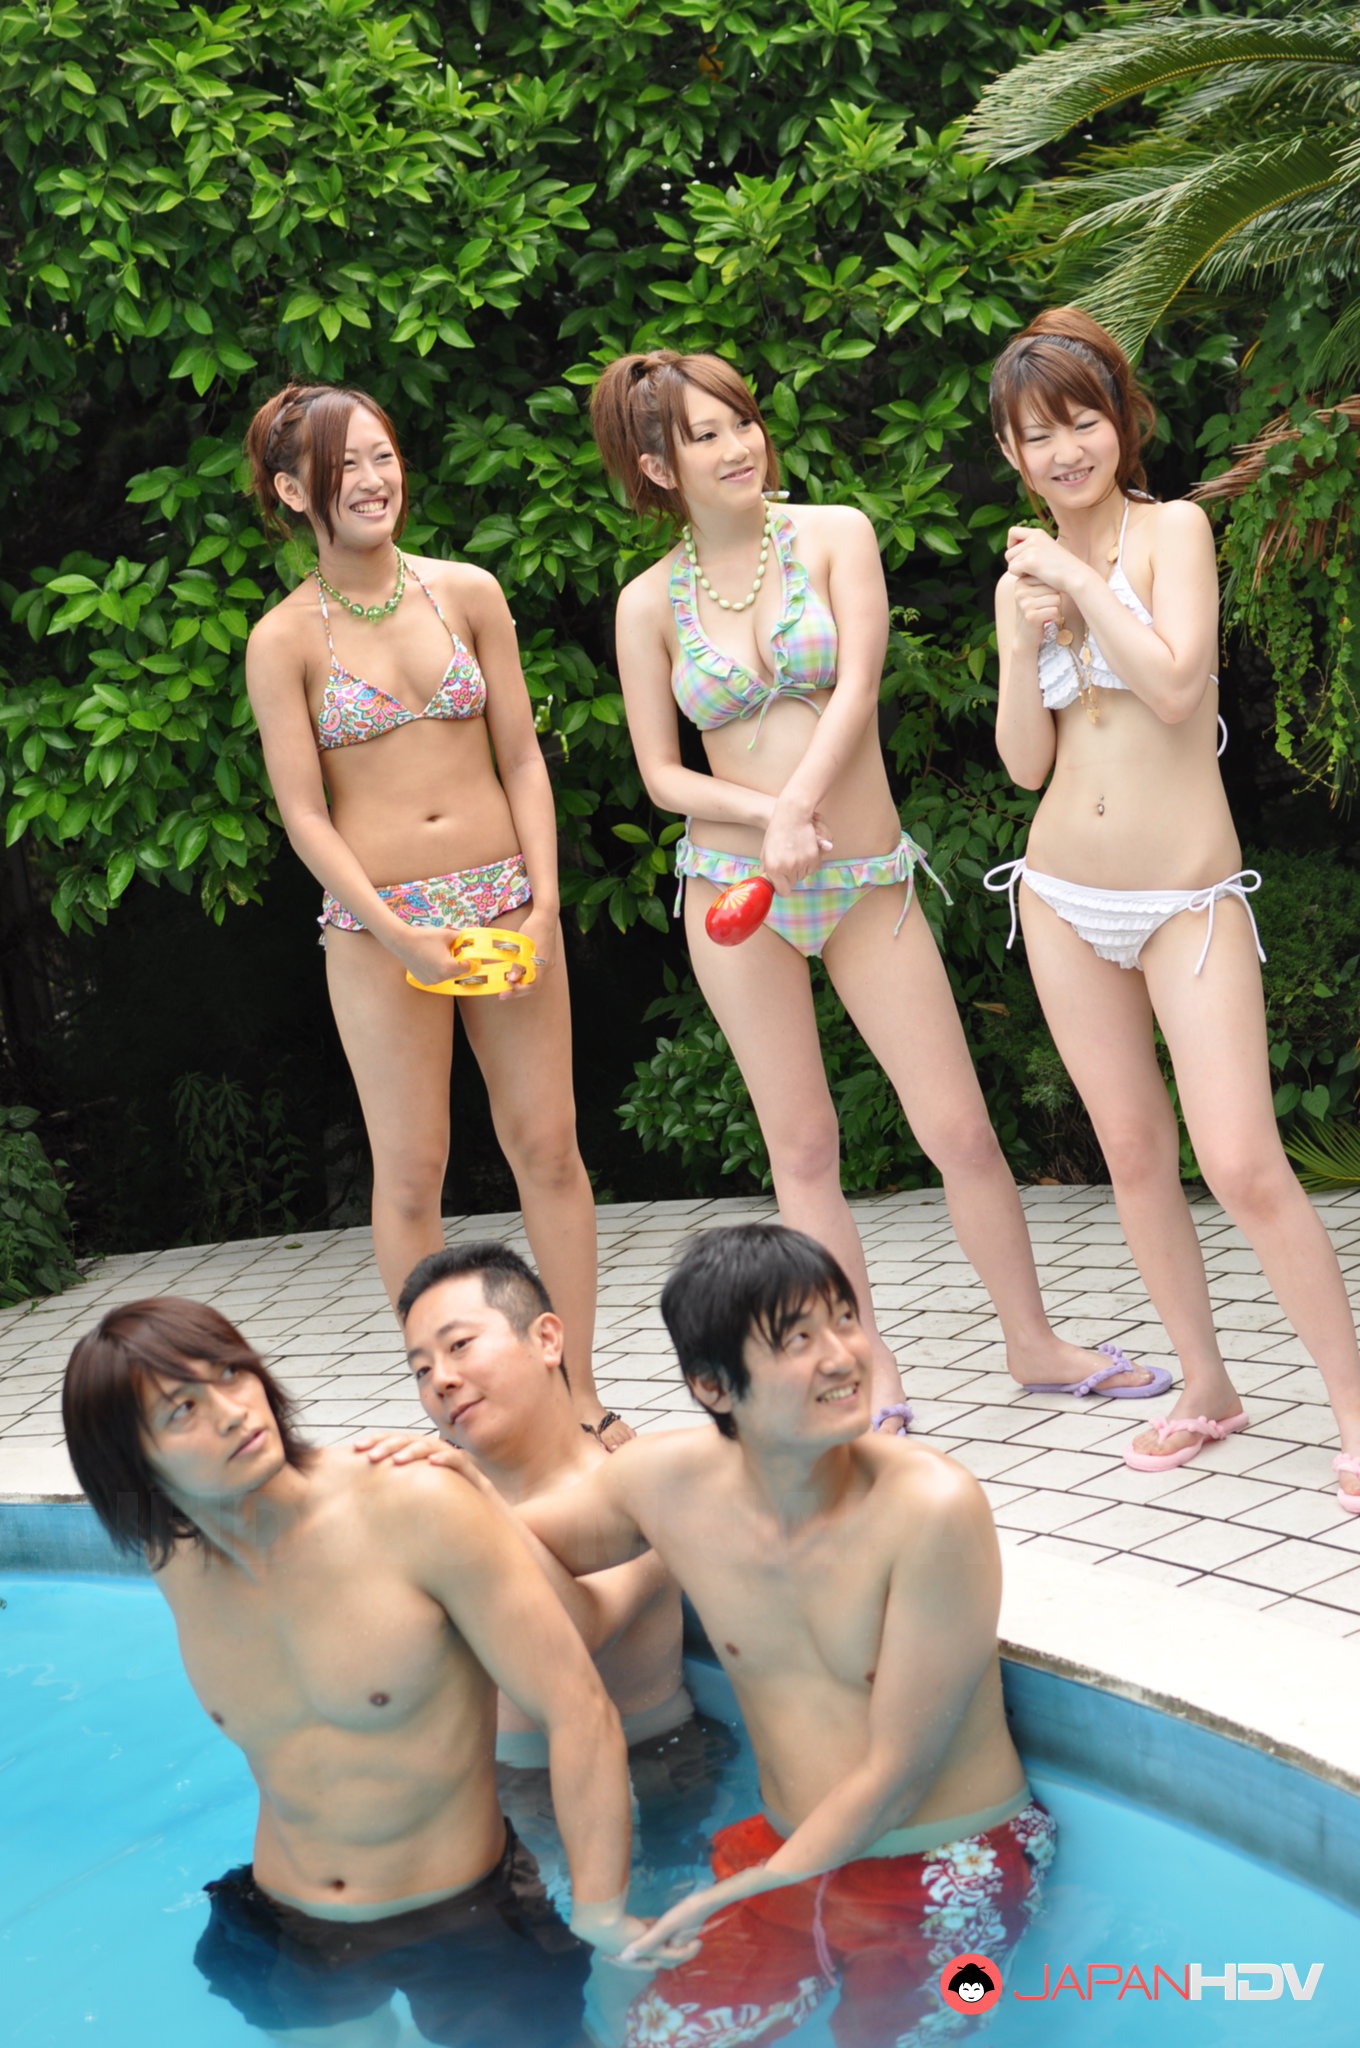 Pool Party Sex - Japanese girls enjoy in some sexy pool party